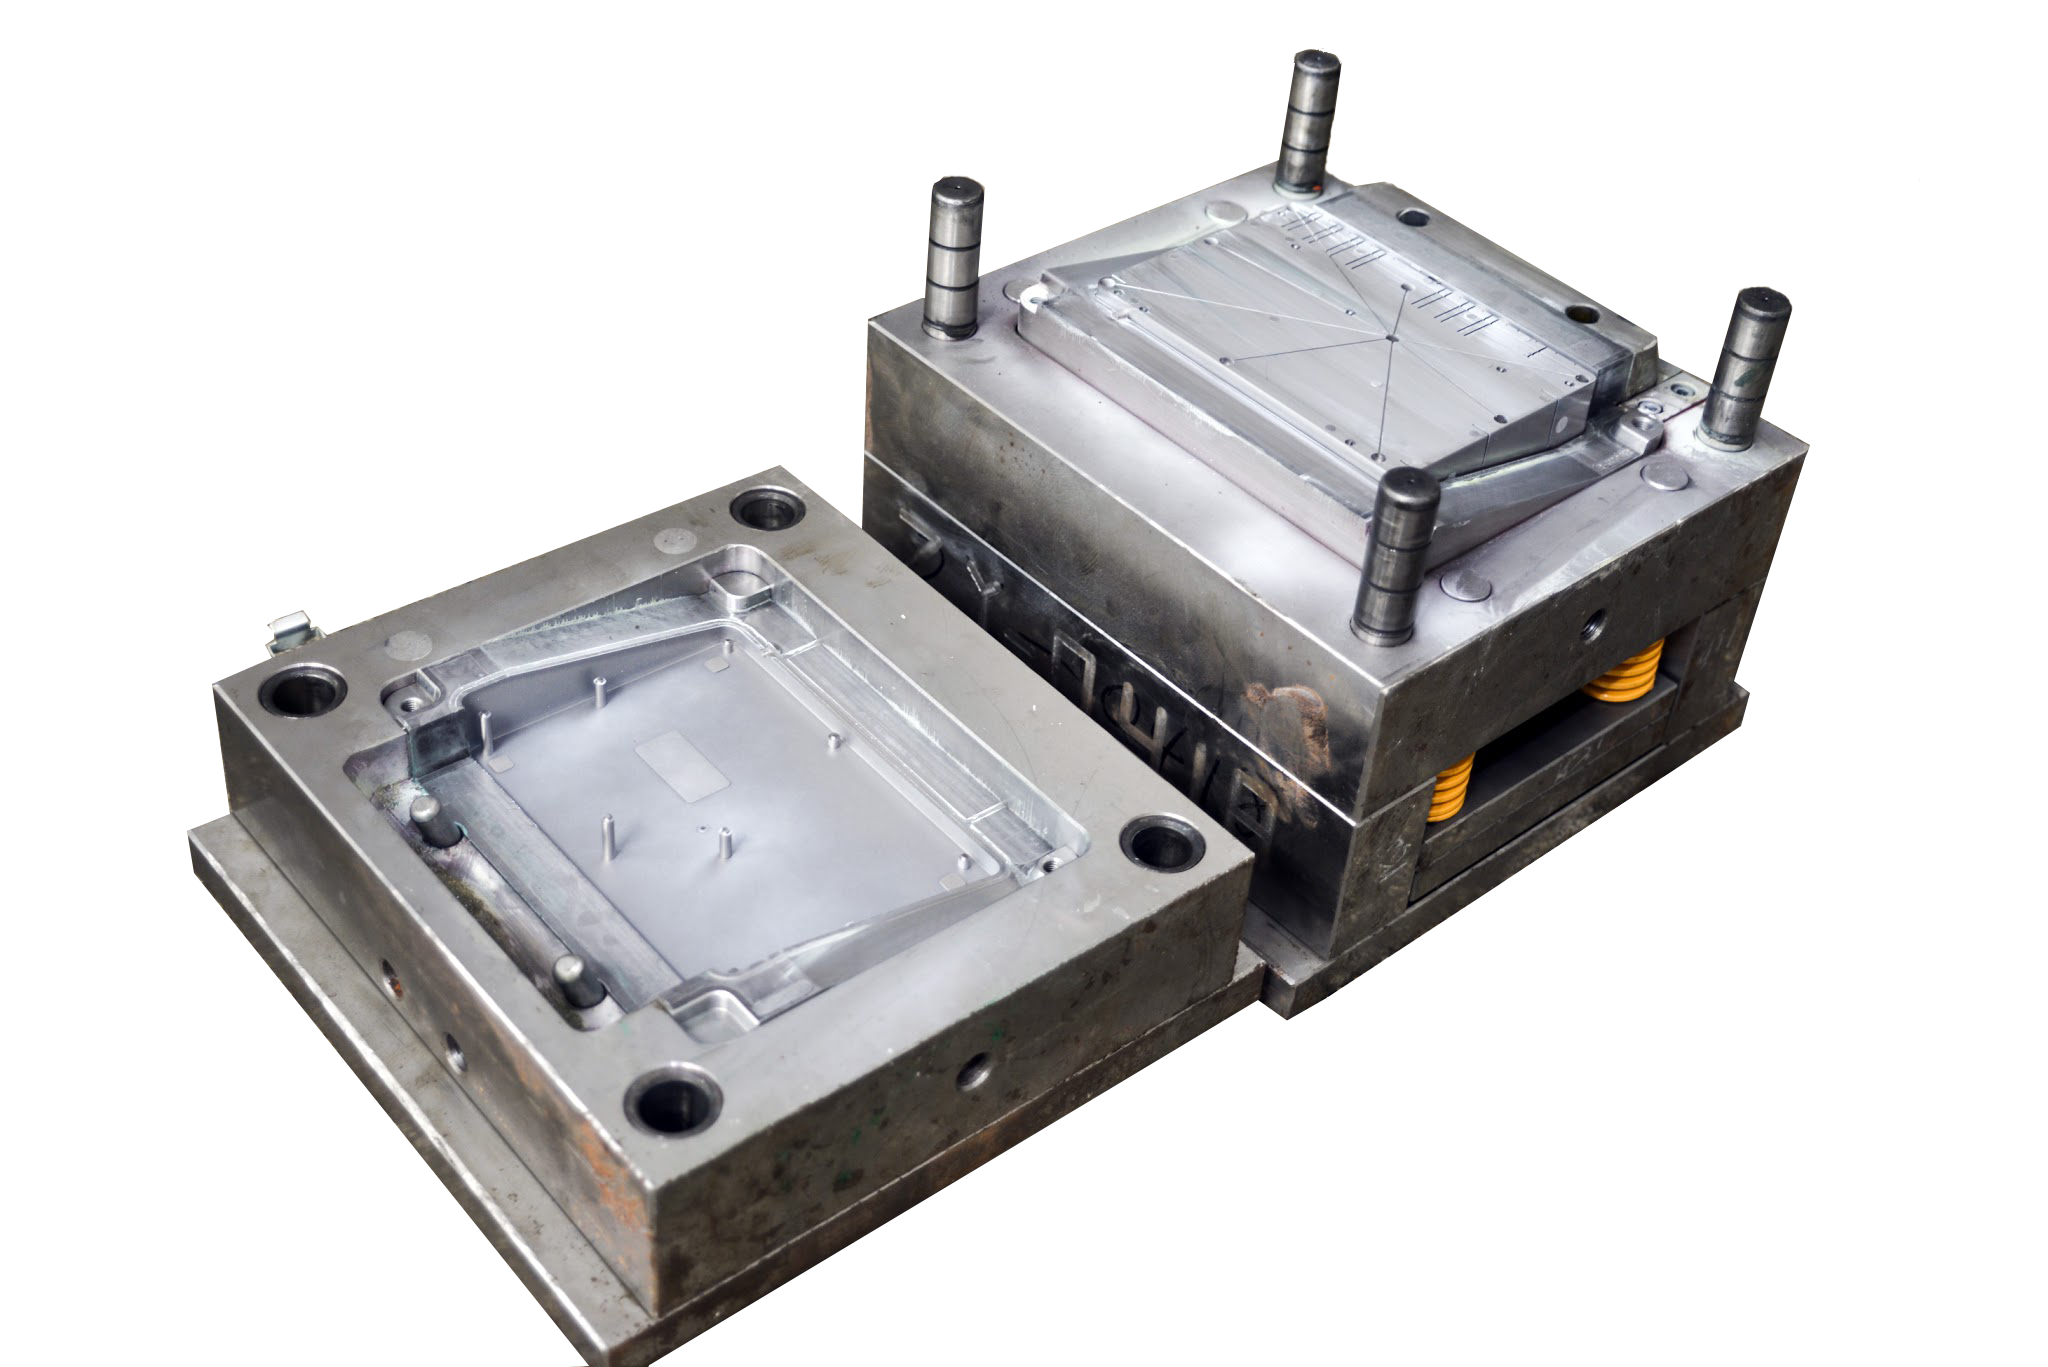 Plastic Injection Molding: Guide on Using an Epoxy Mold